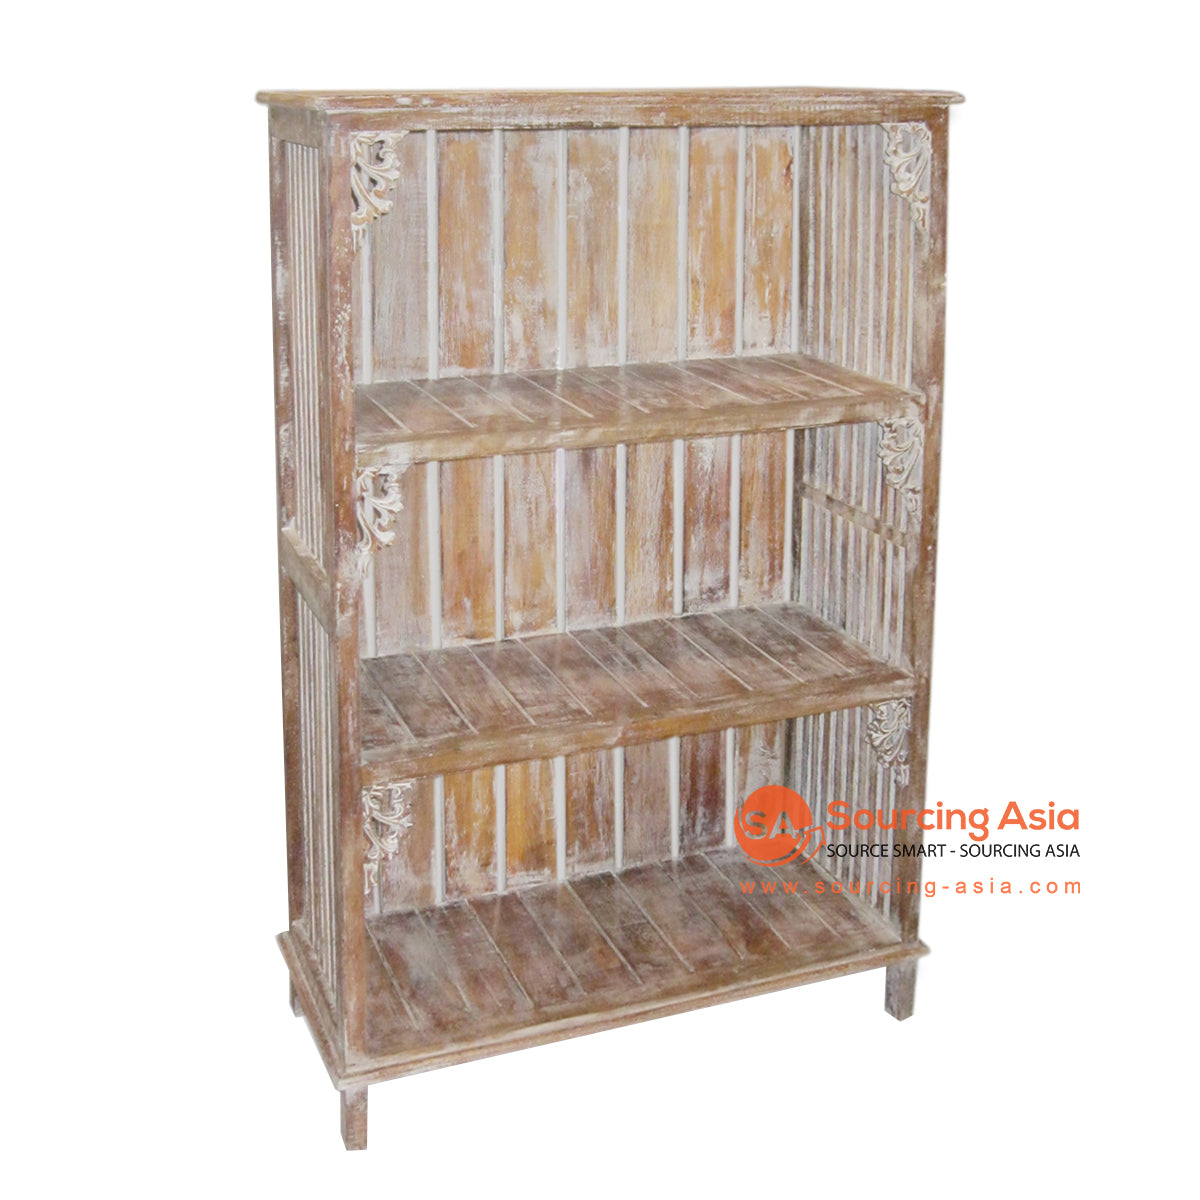 THE079-1 BROWN WASH WOODEN BOOK SHELF WITH THREE SLOTS AND CARVING